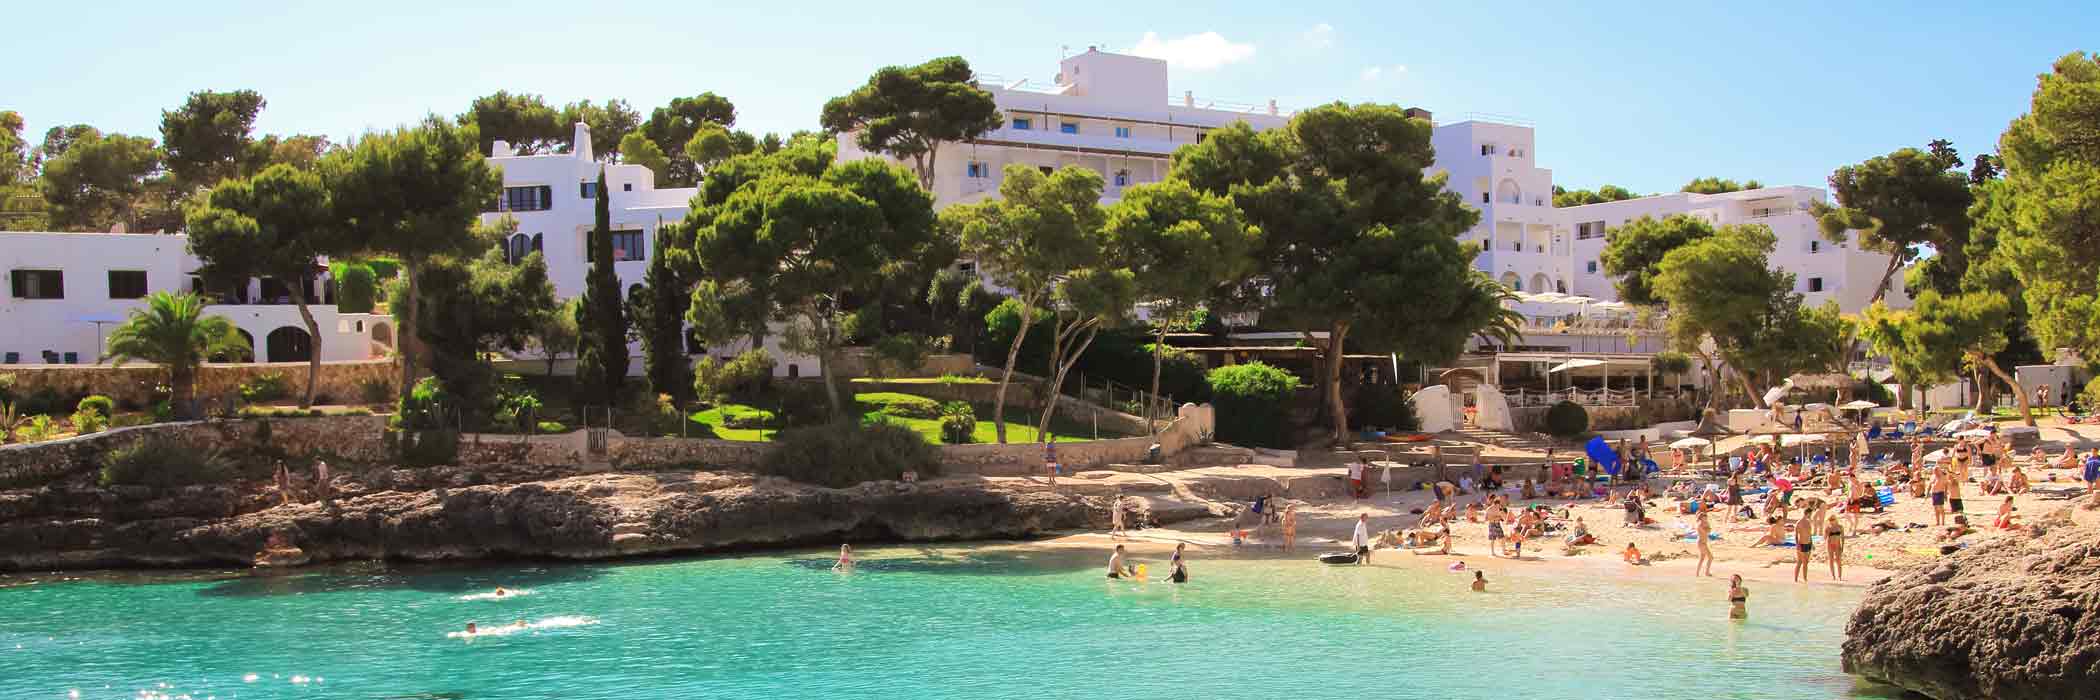 Holidays To Majorca From Manchester